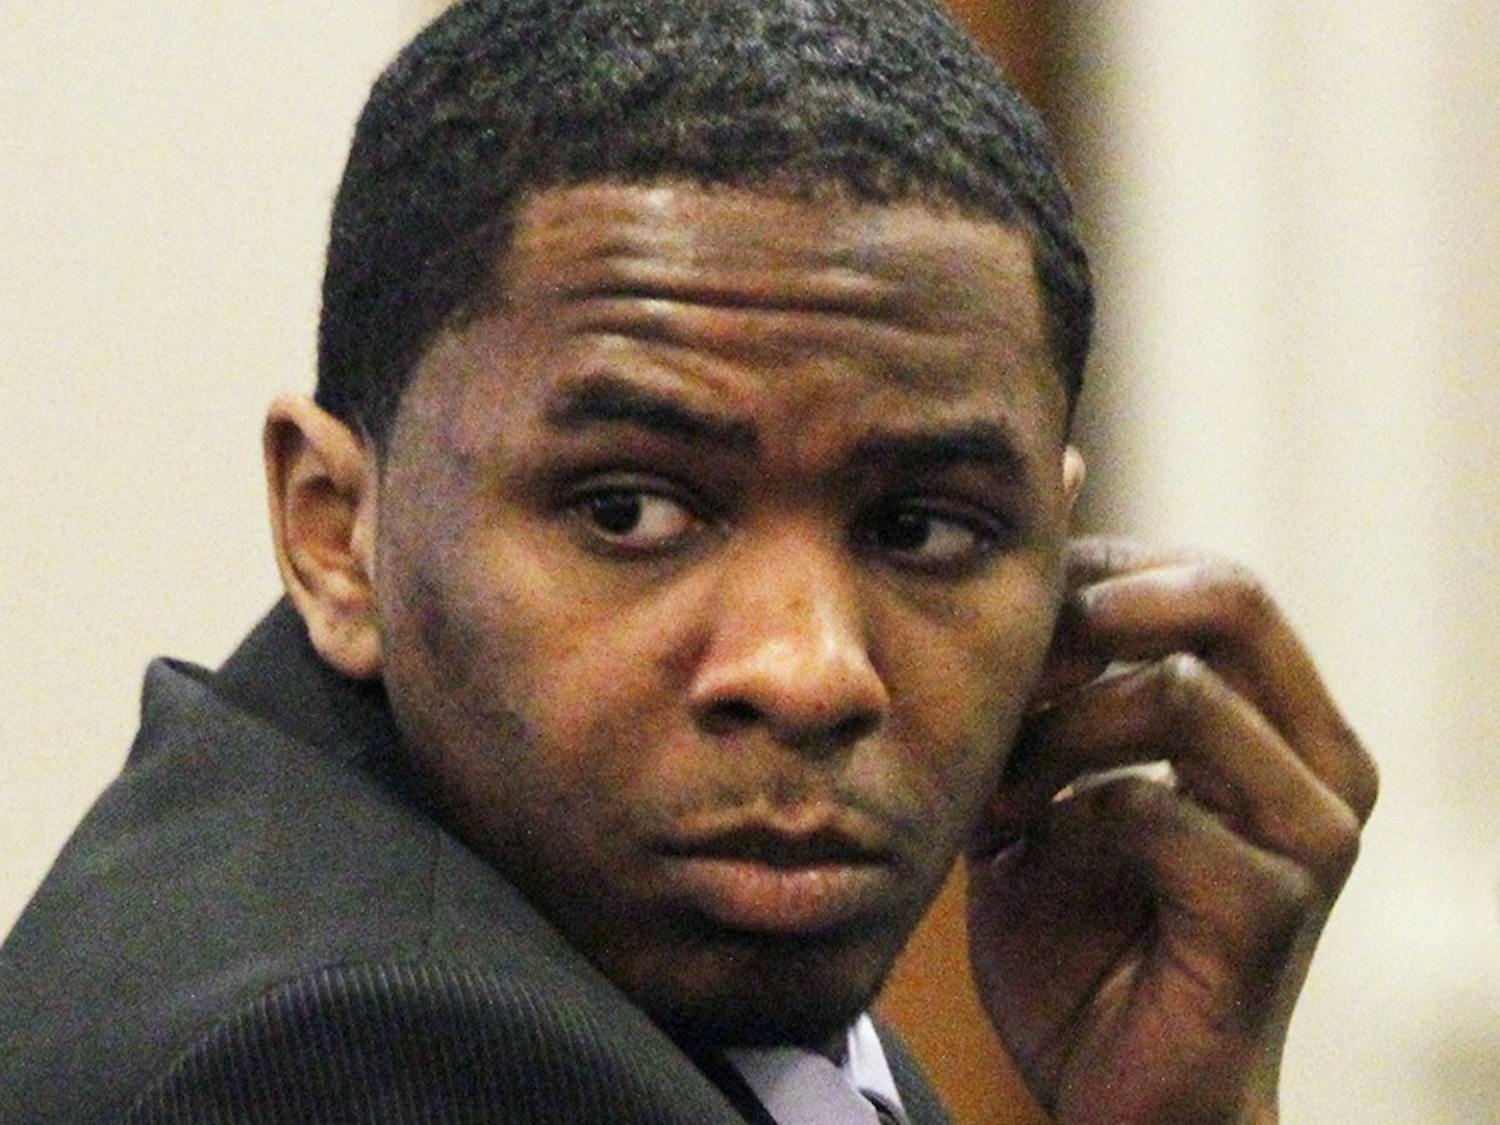 Defendant Laurence Alvin Lovette, 21, turns to watch courtroom activity behind the defense table during a break in the second day of testimony Thursday, Dec. 8, 2011 in the Battle Courtroom, Hillsborough, NC. Lovette, from Durham,NC  is one of two men charged in the kidnap, robbery and murder of UNC student body president Eve Carson on March 5, 2008. 